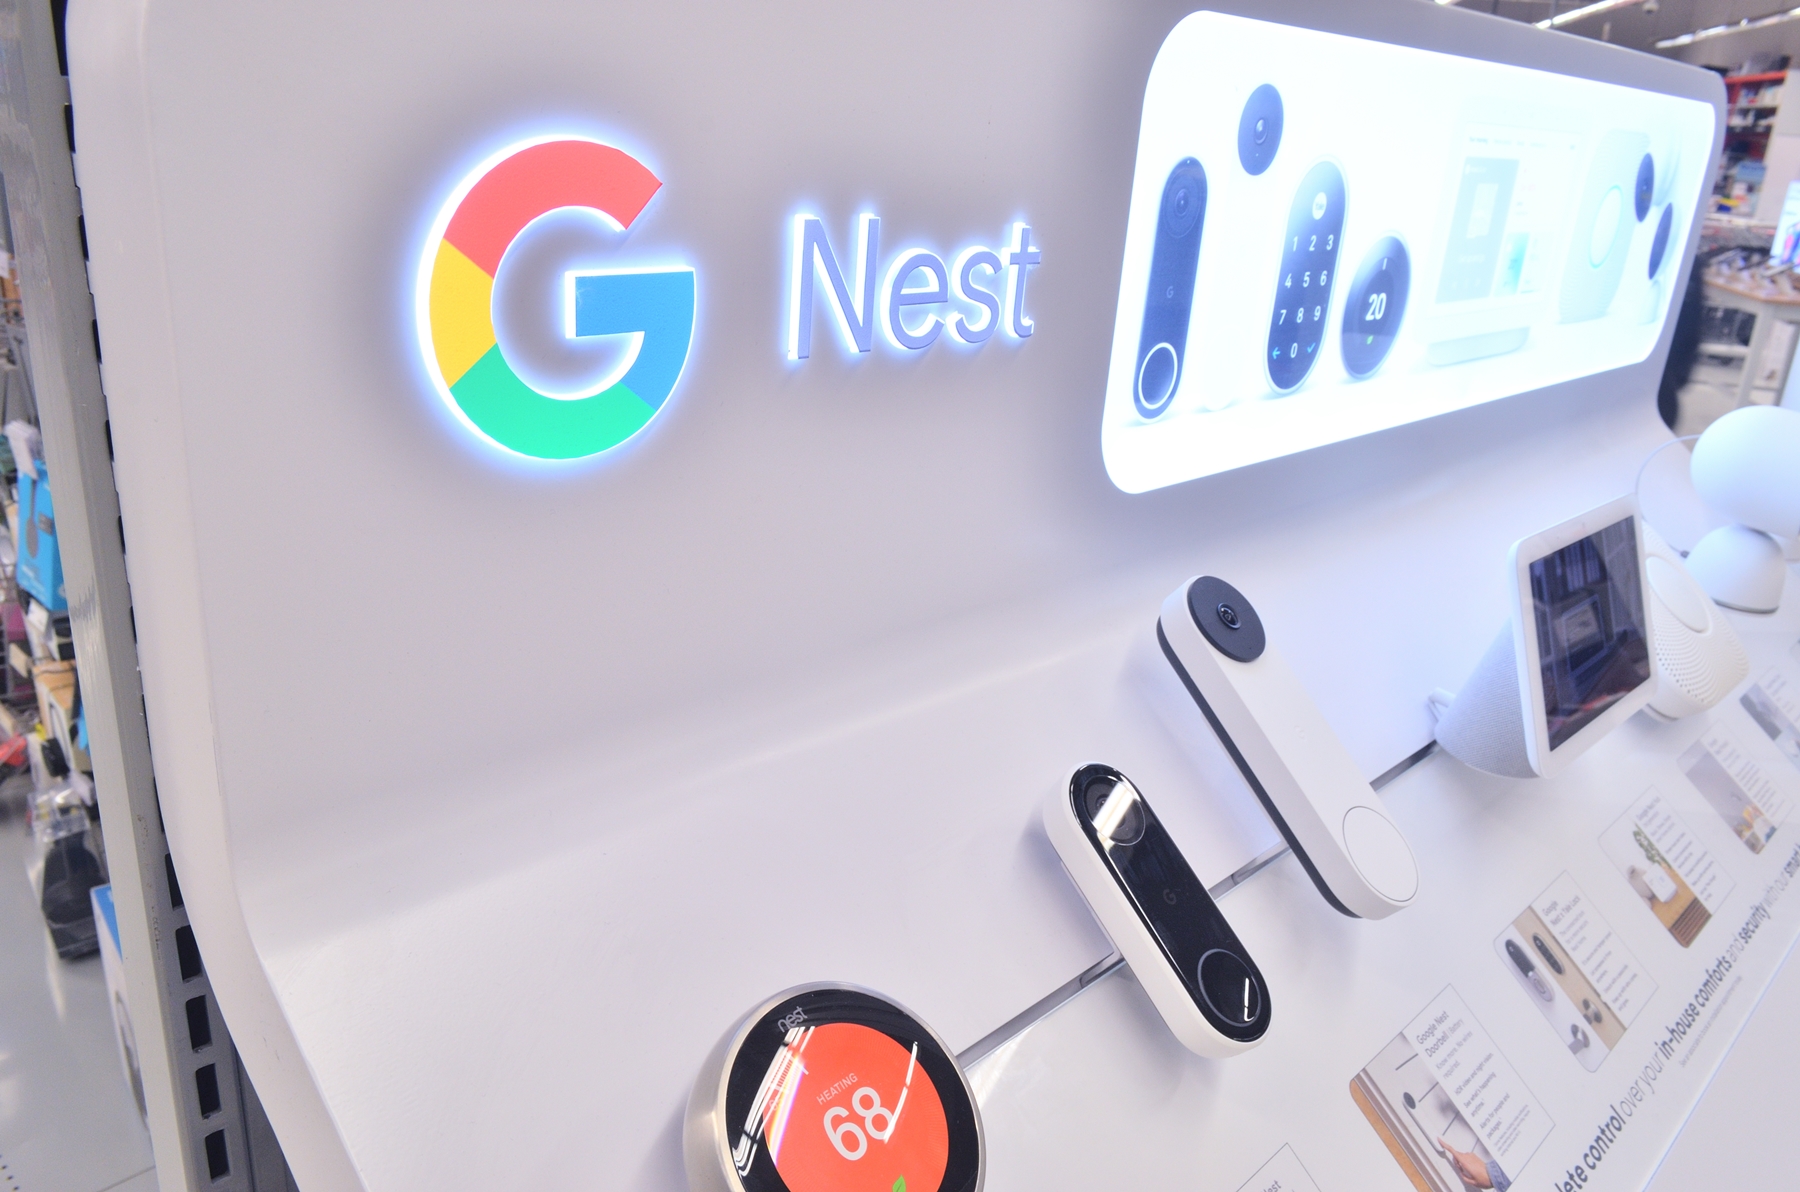 What Is Google Nest And How Does It Work?